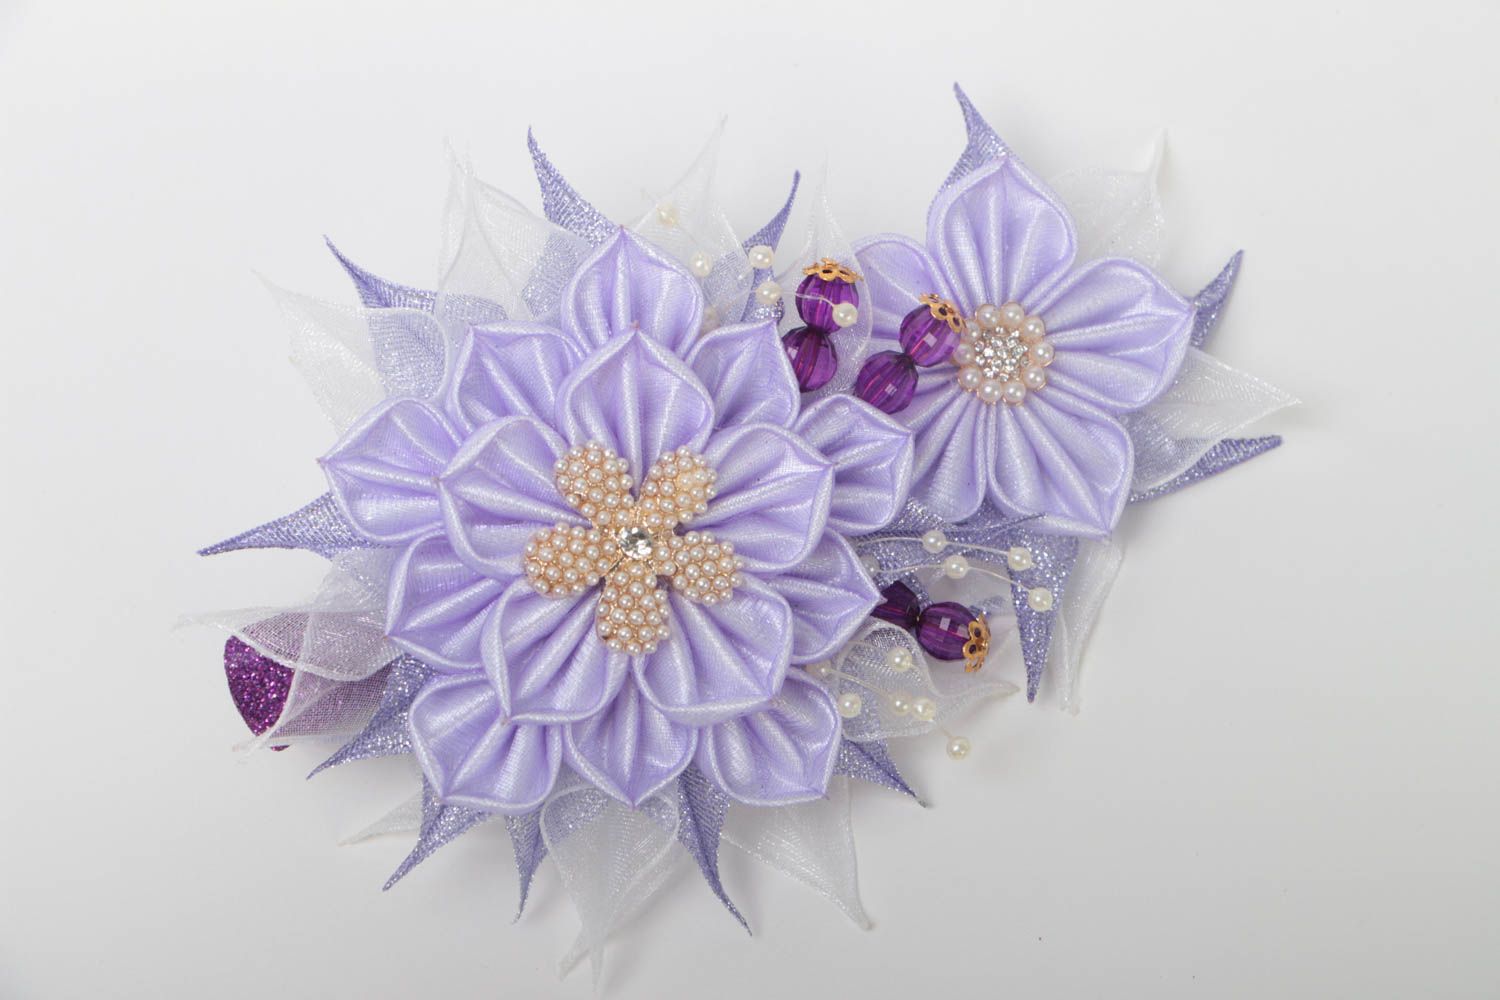 Handcrafted textile flower barrette kanzashi ideas handmade gifts for her photo 2